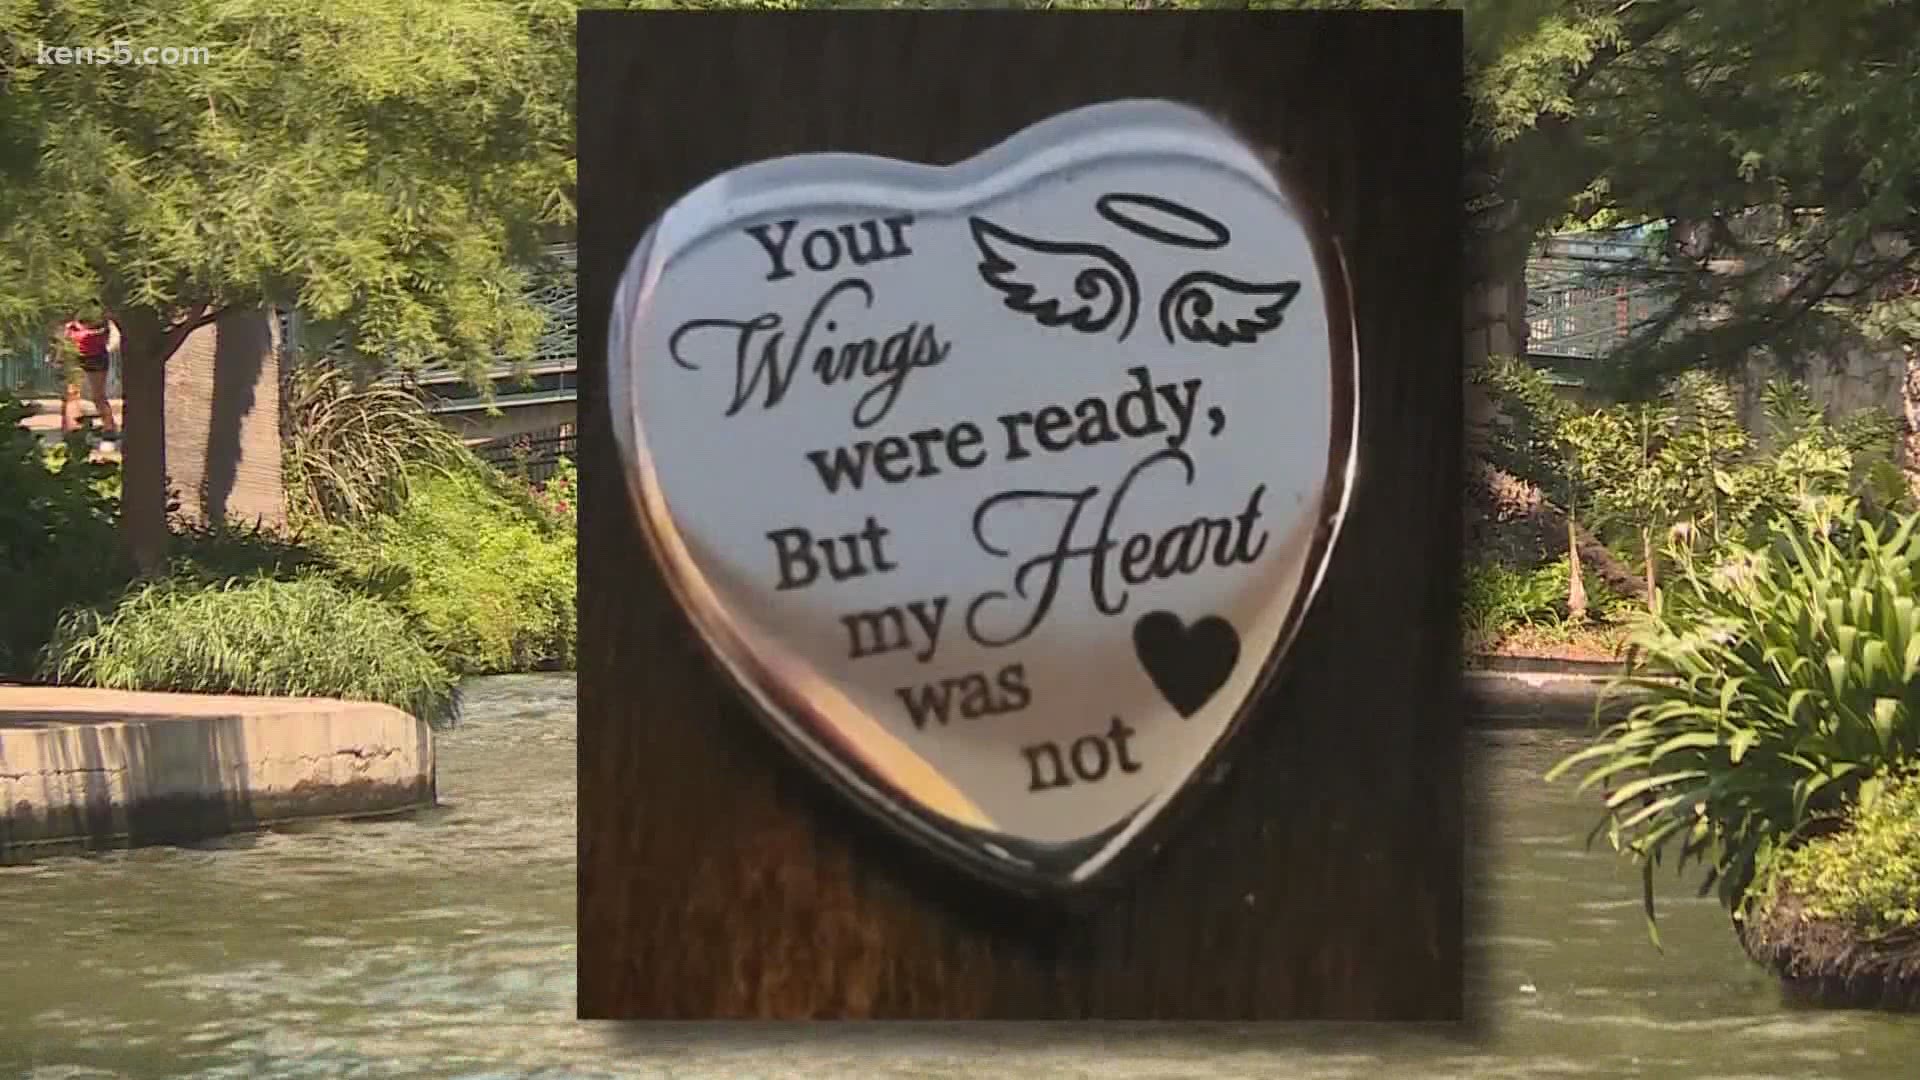 A New Mexico family found the heart-shaped pendant on their visit to San Antonio. Whether it is a precious keepsake or not, is a question only the owner can answer.